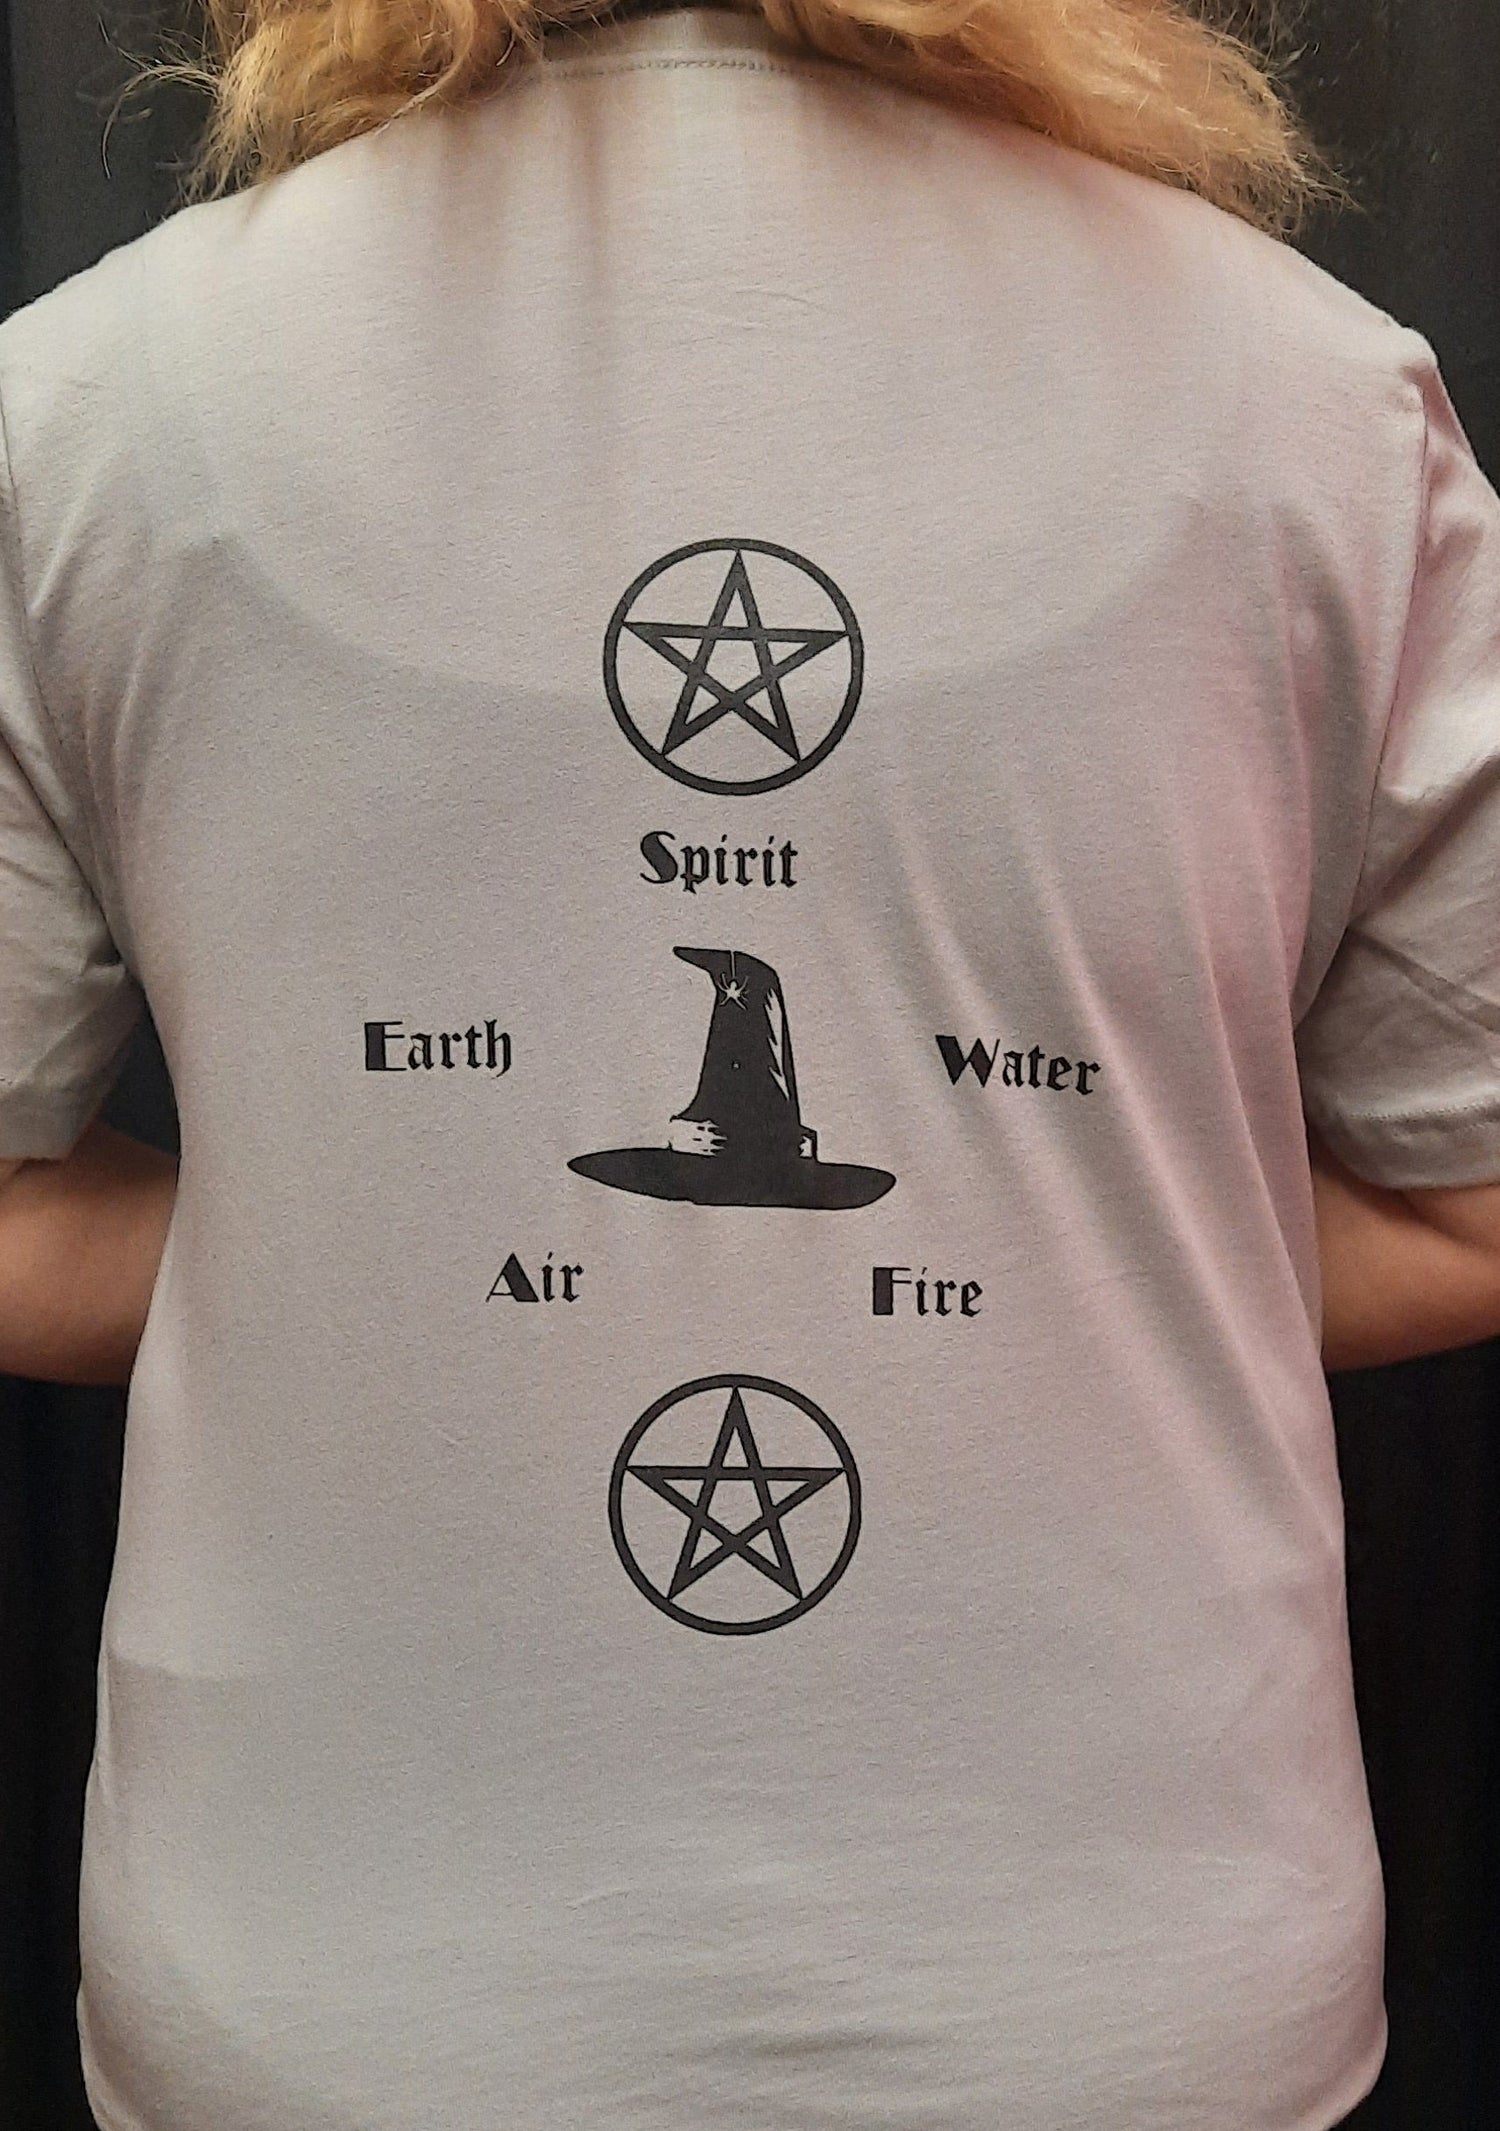 Bella Canvas short sleeve T-Shirt, size large.  "Wiccan" design on front.  Earth, Air, Fire, Water, Spirit design on back.